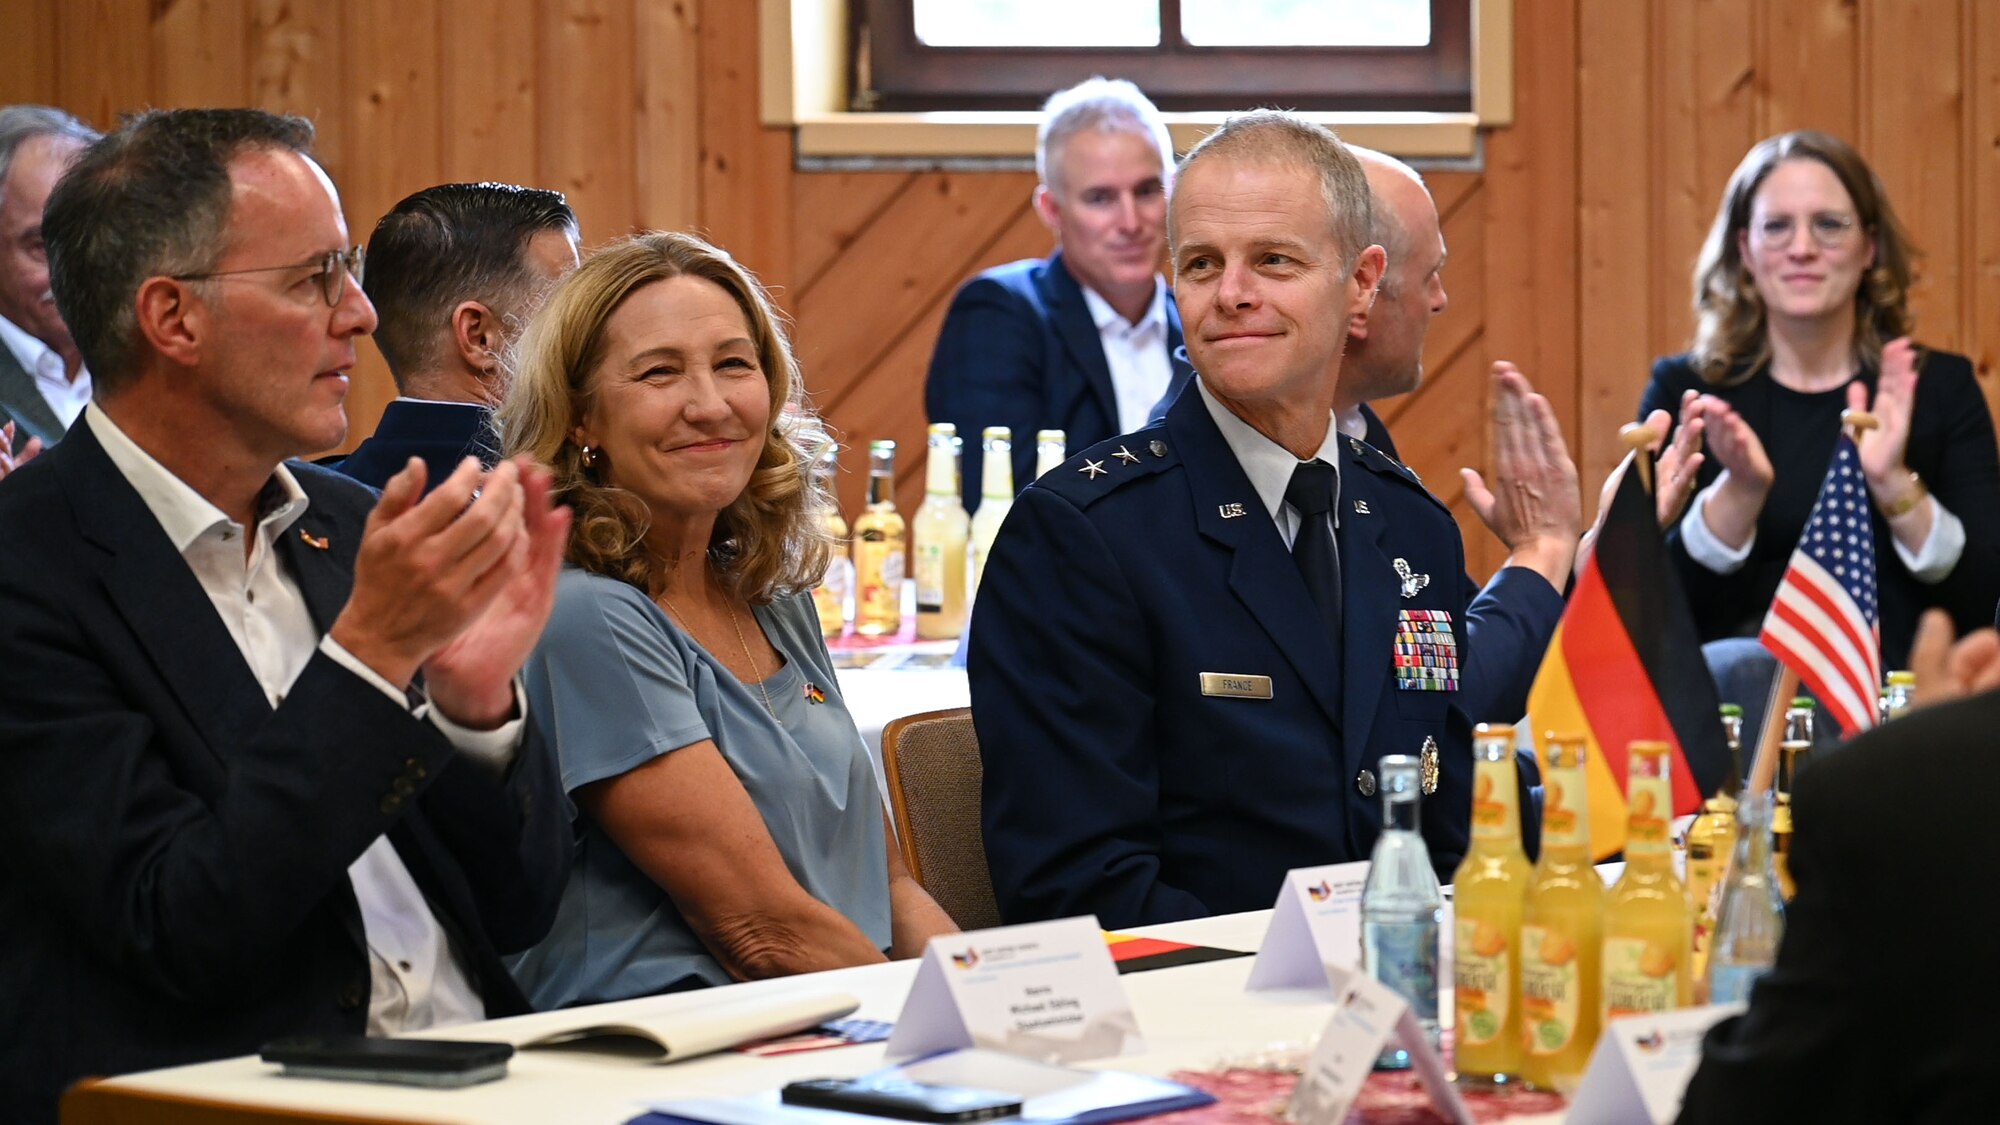 U.S. Air Force Maj. Gen. Derek France, Third Air Force commander, smiles during his introduction at the start of a ceremony at the Spangdahlem Community Center